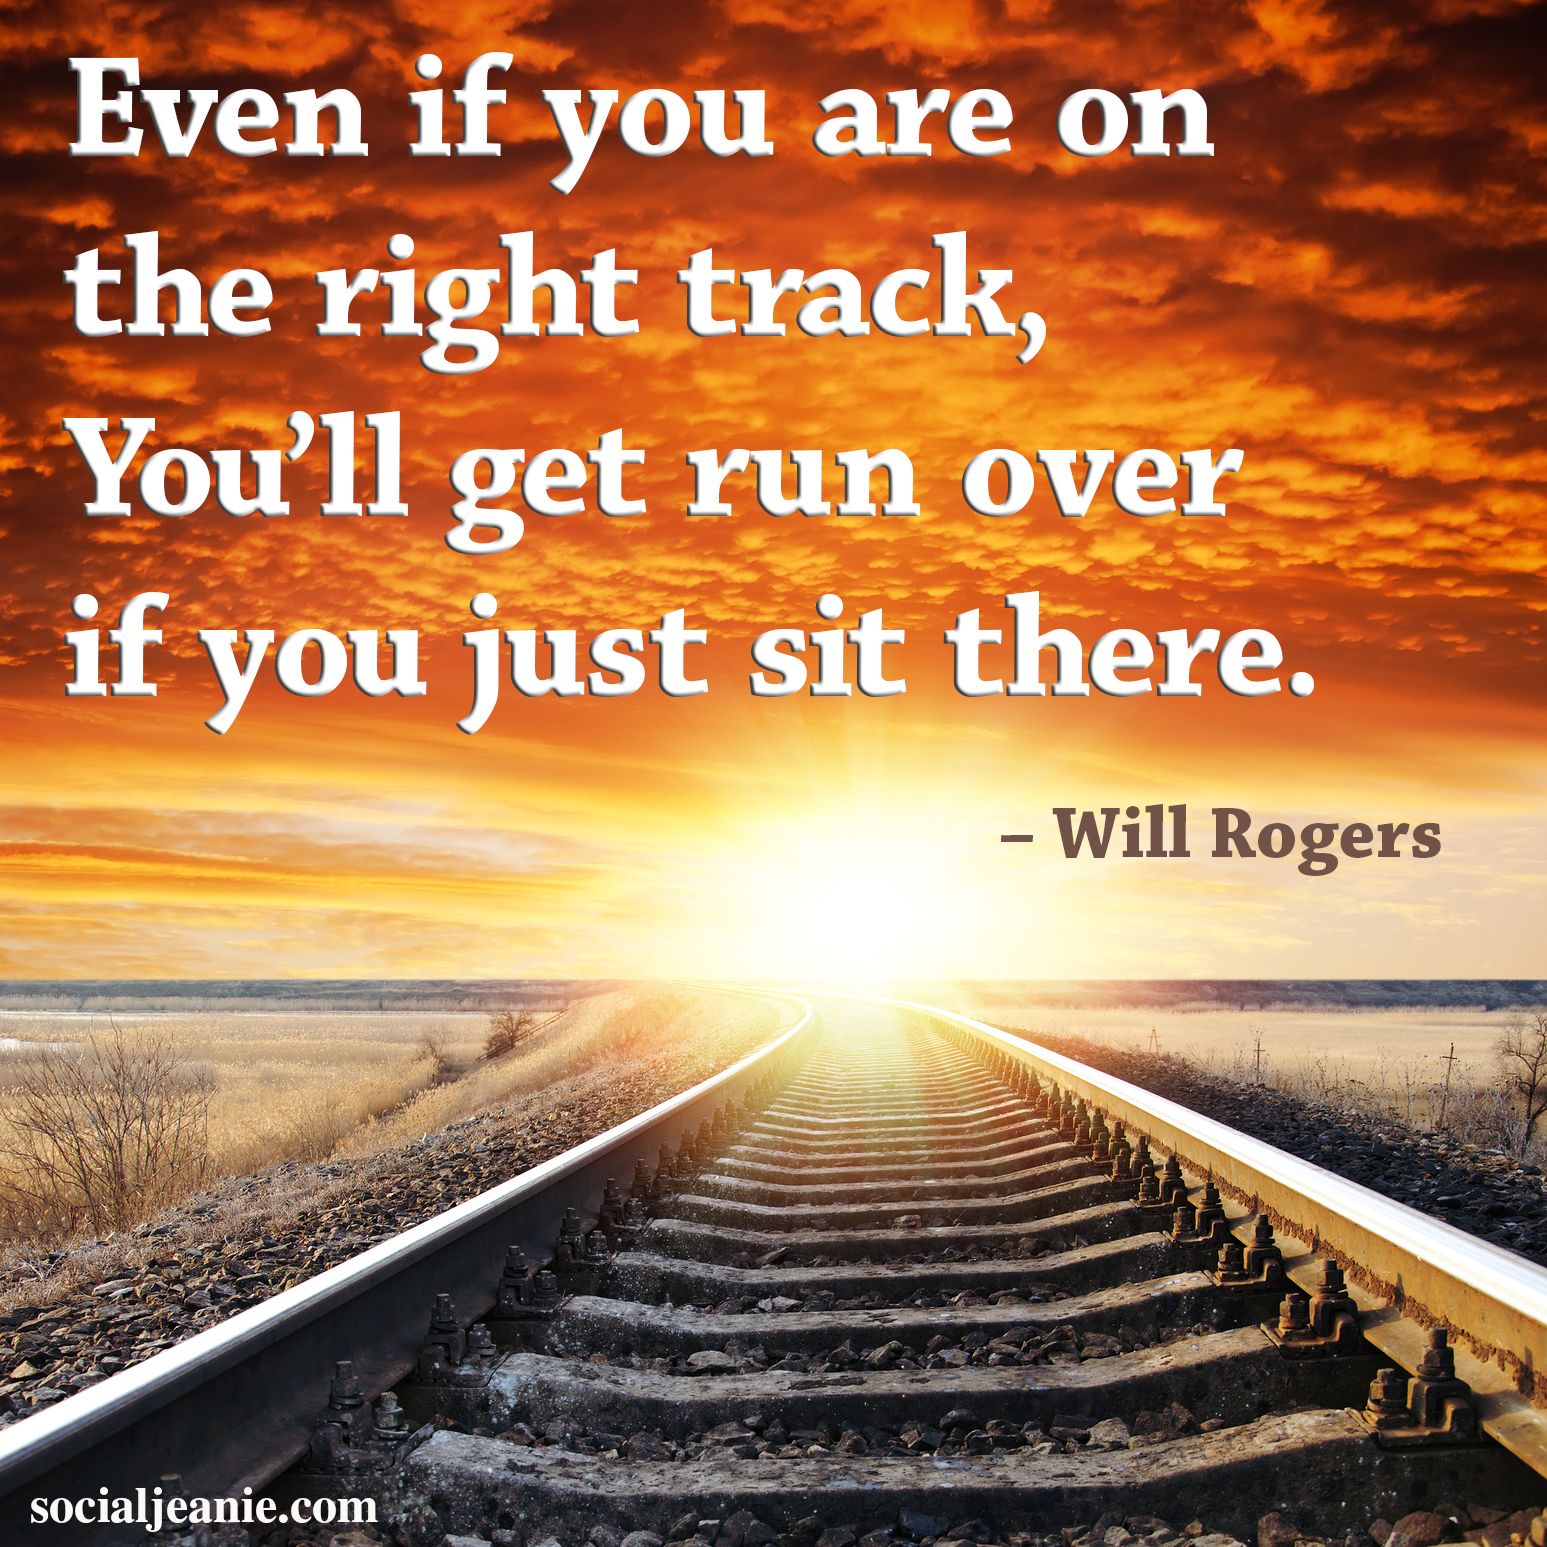 dream Will rogers quote 